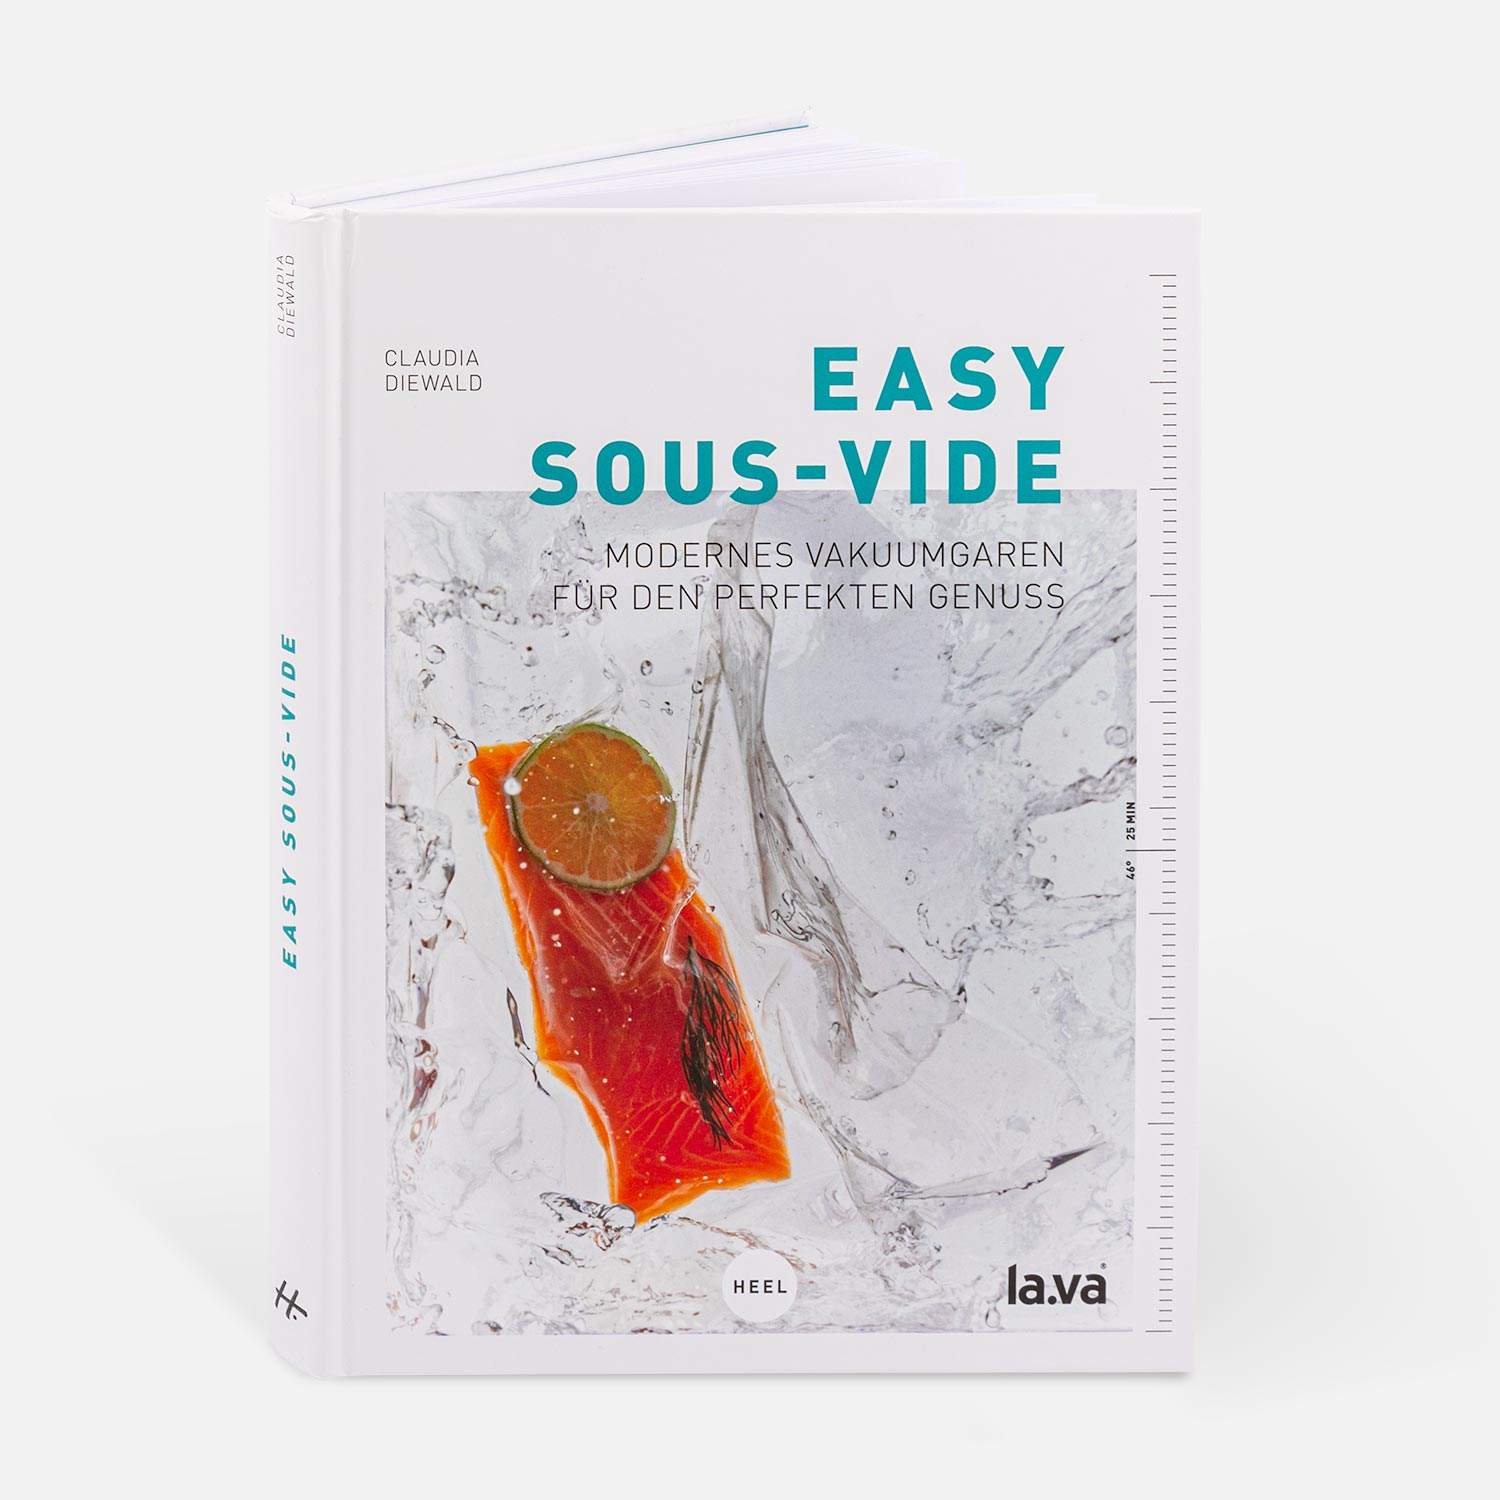 Easy sous-vide book cover